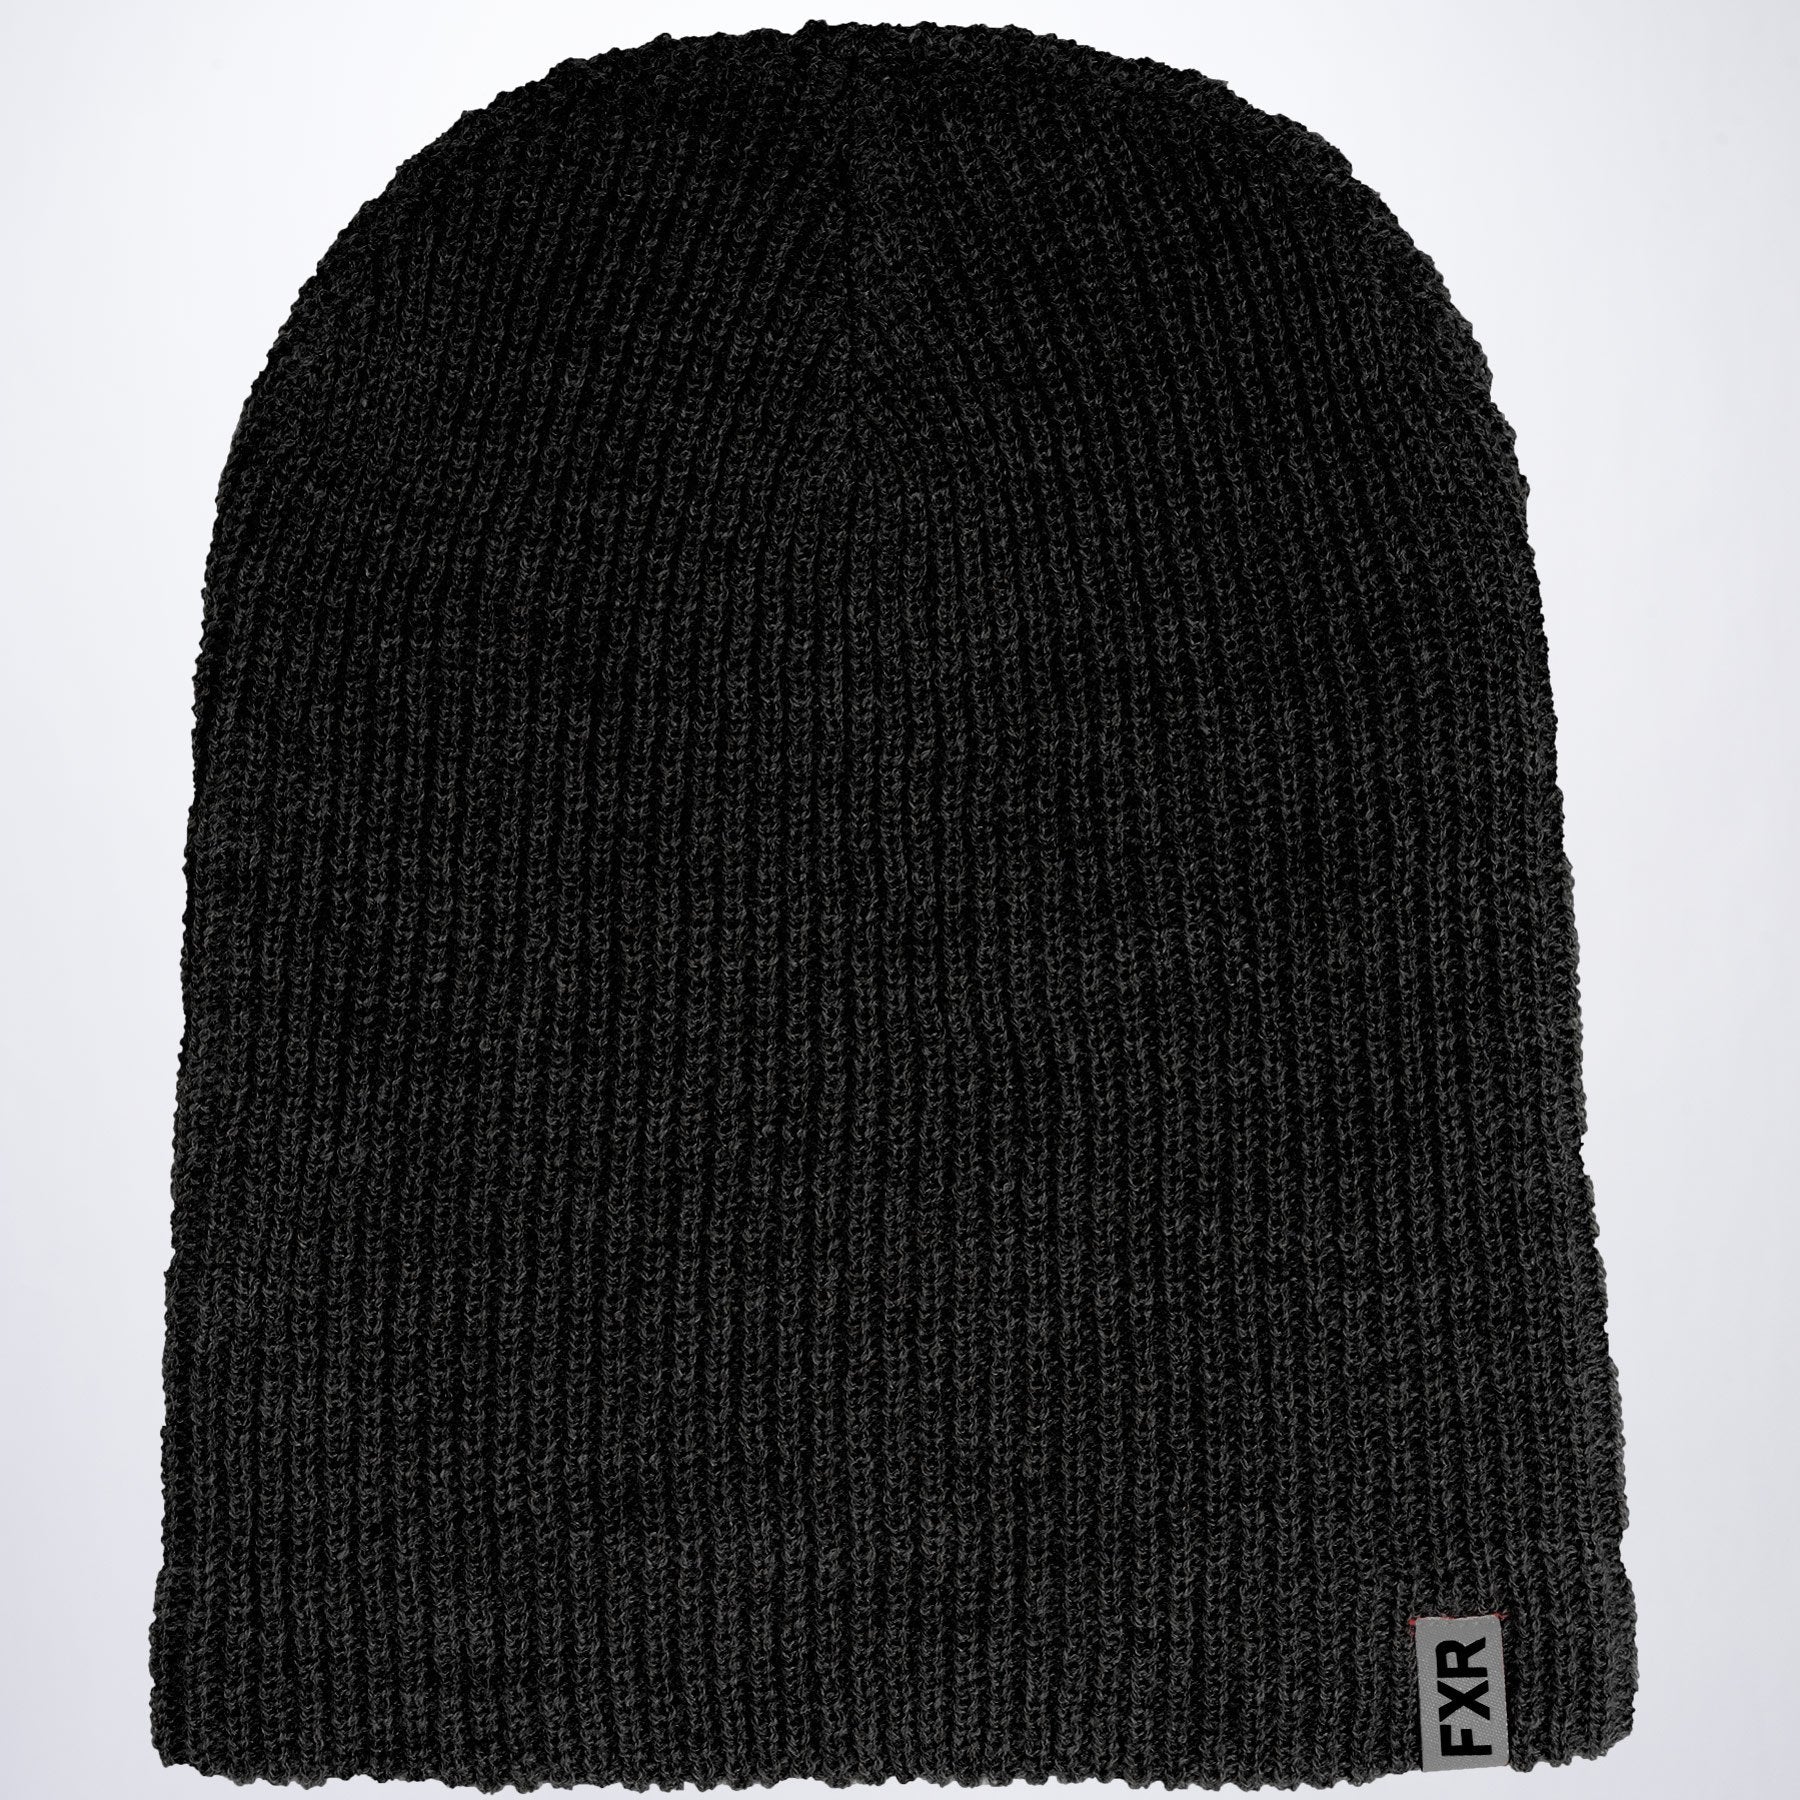 TUQUE FXR ADULTE, ROGUE